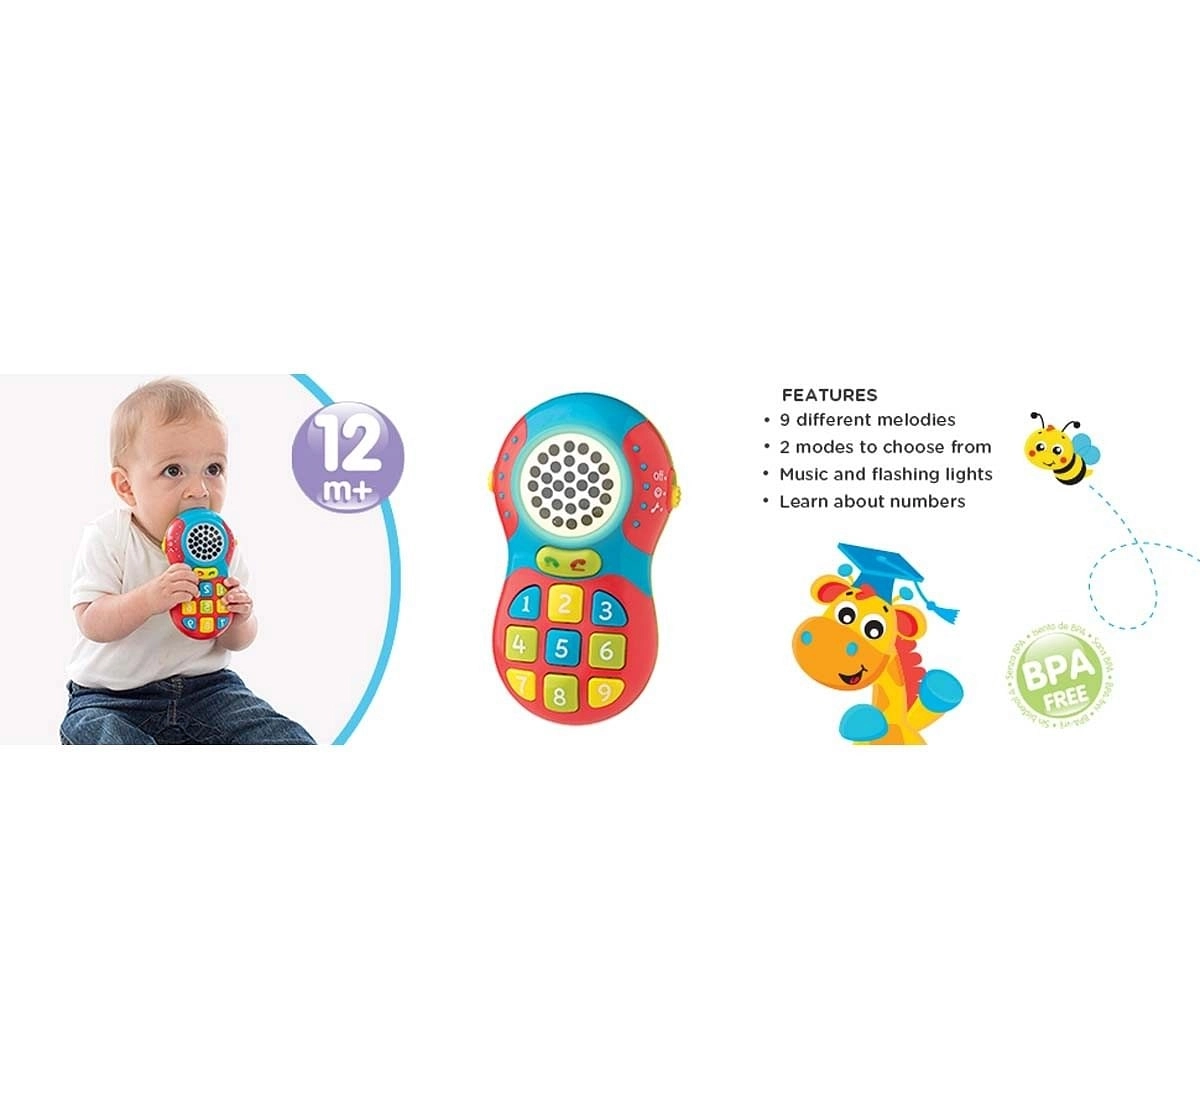 Playgro Dial-A-Friend Phone Learning Toys for Kids age 12M+ 